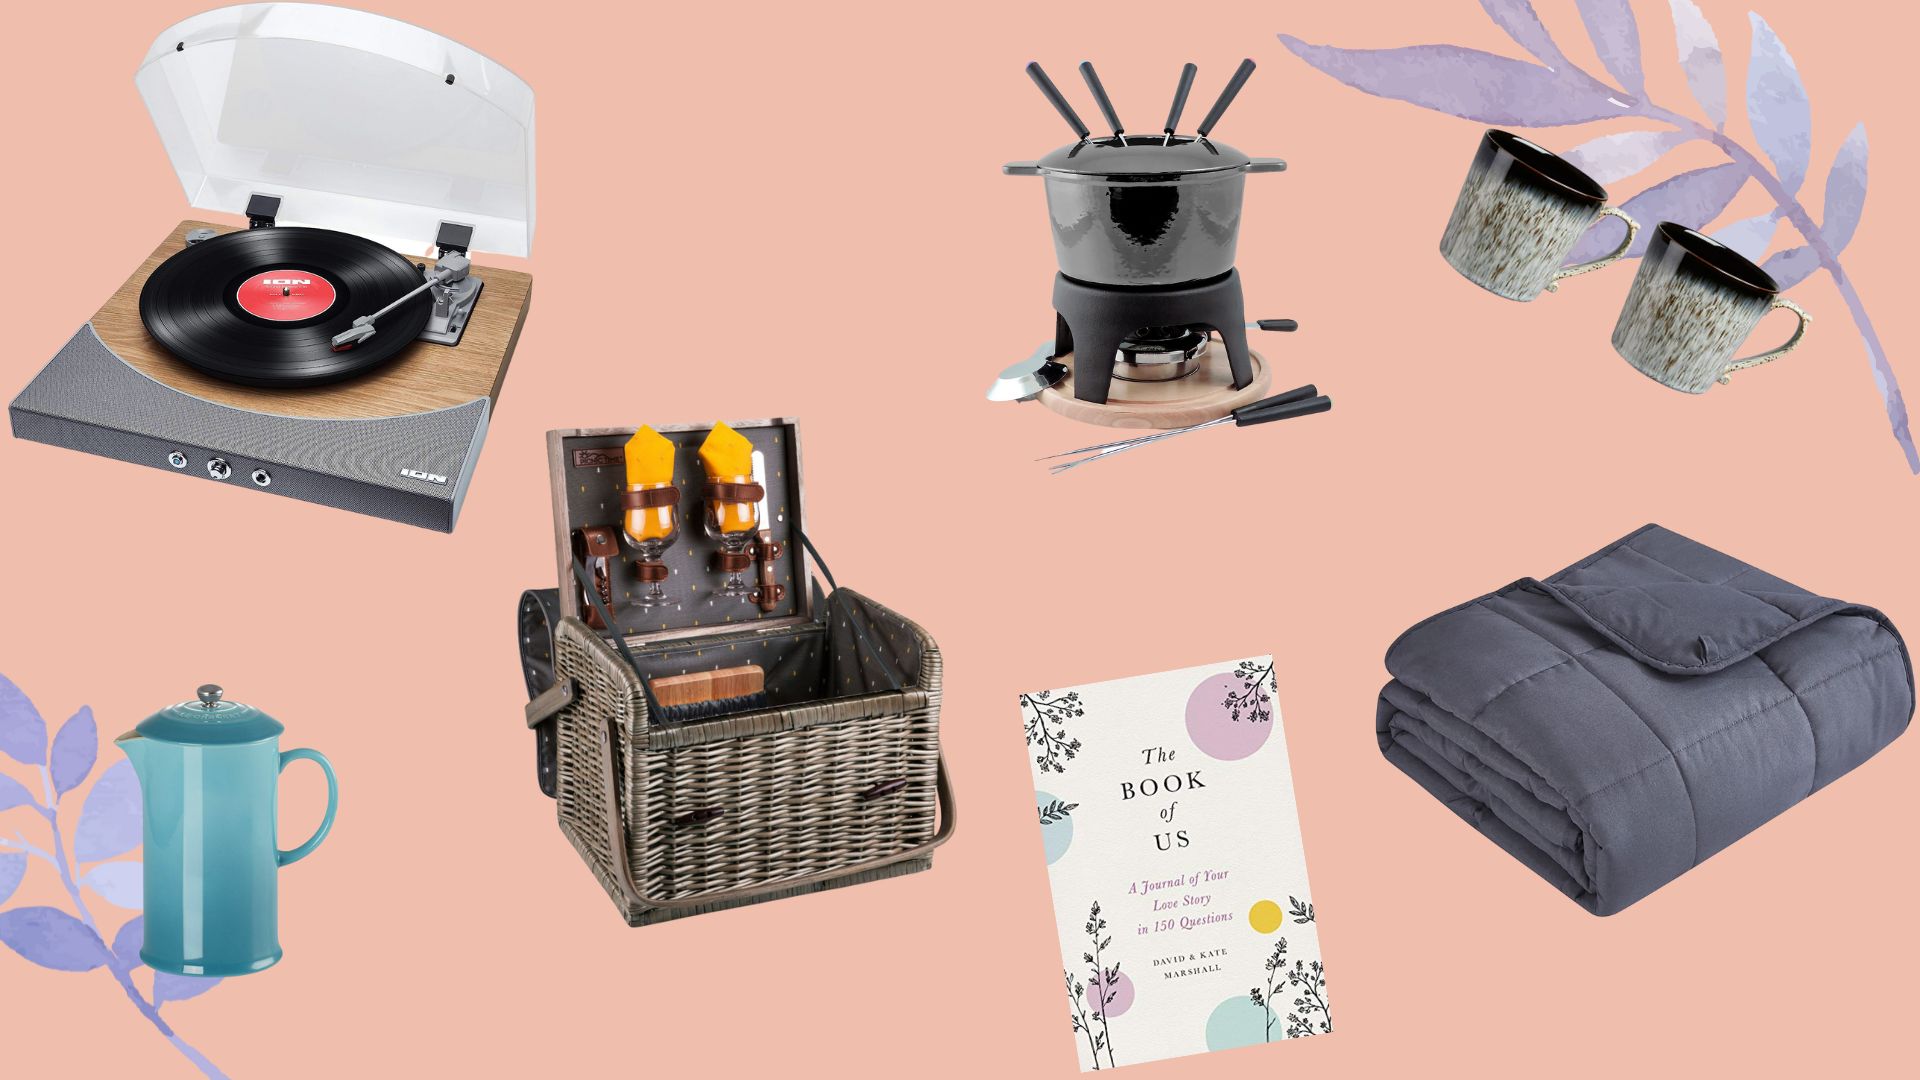 Slate's guide to unusual but useful gifts to delight your family.